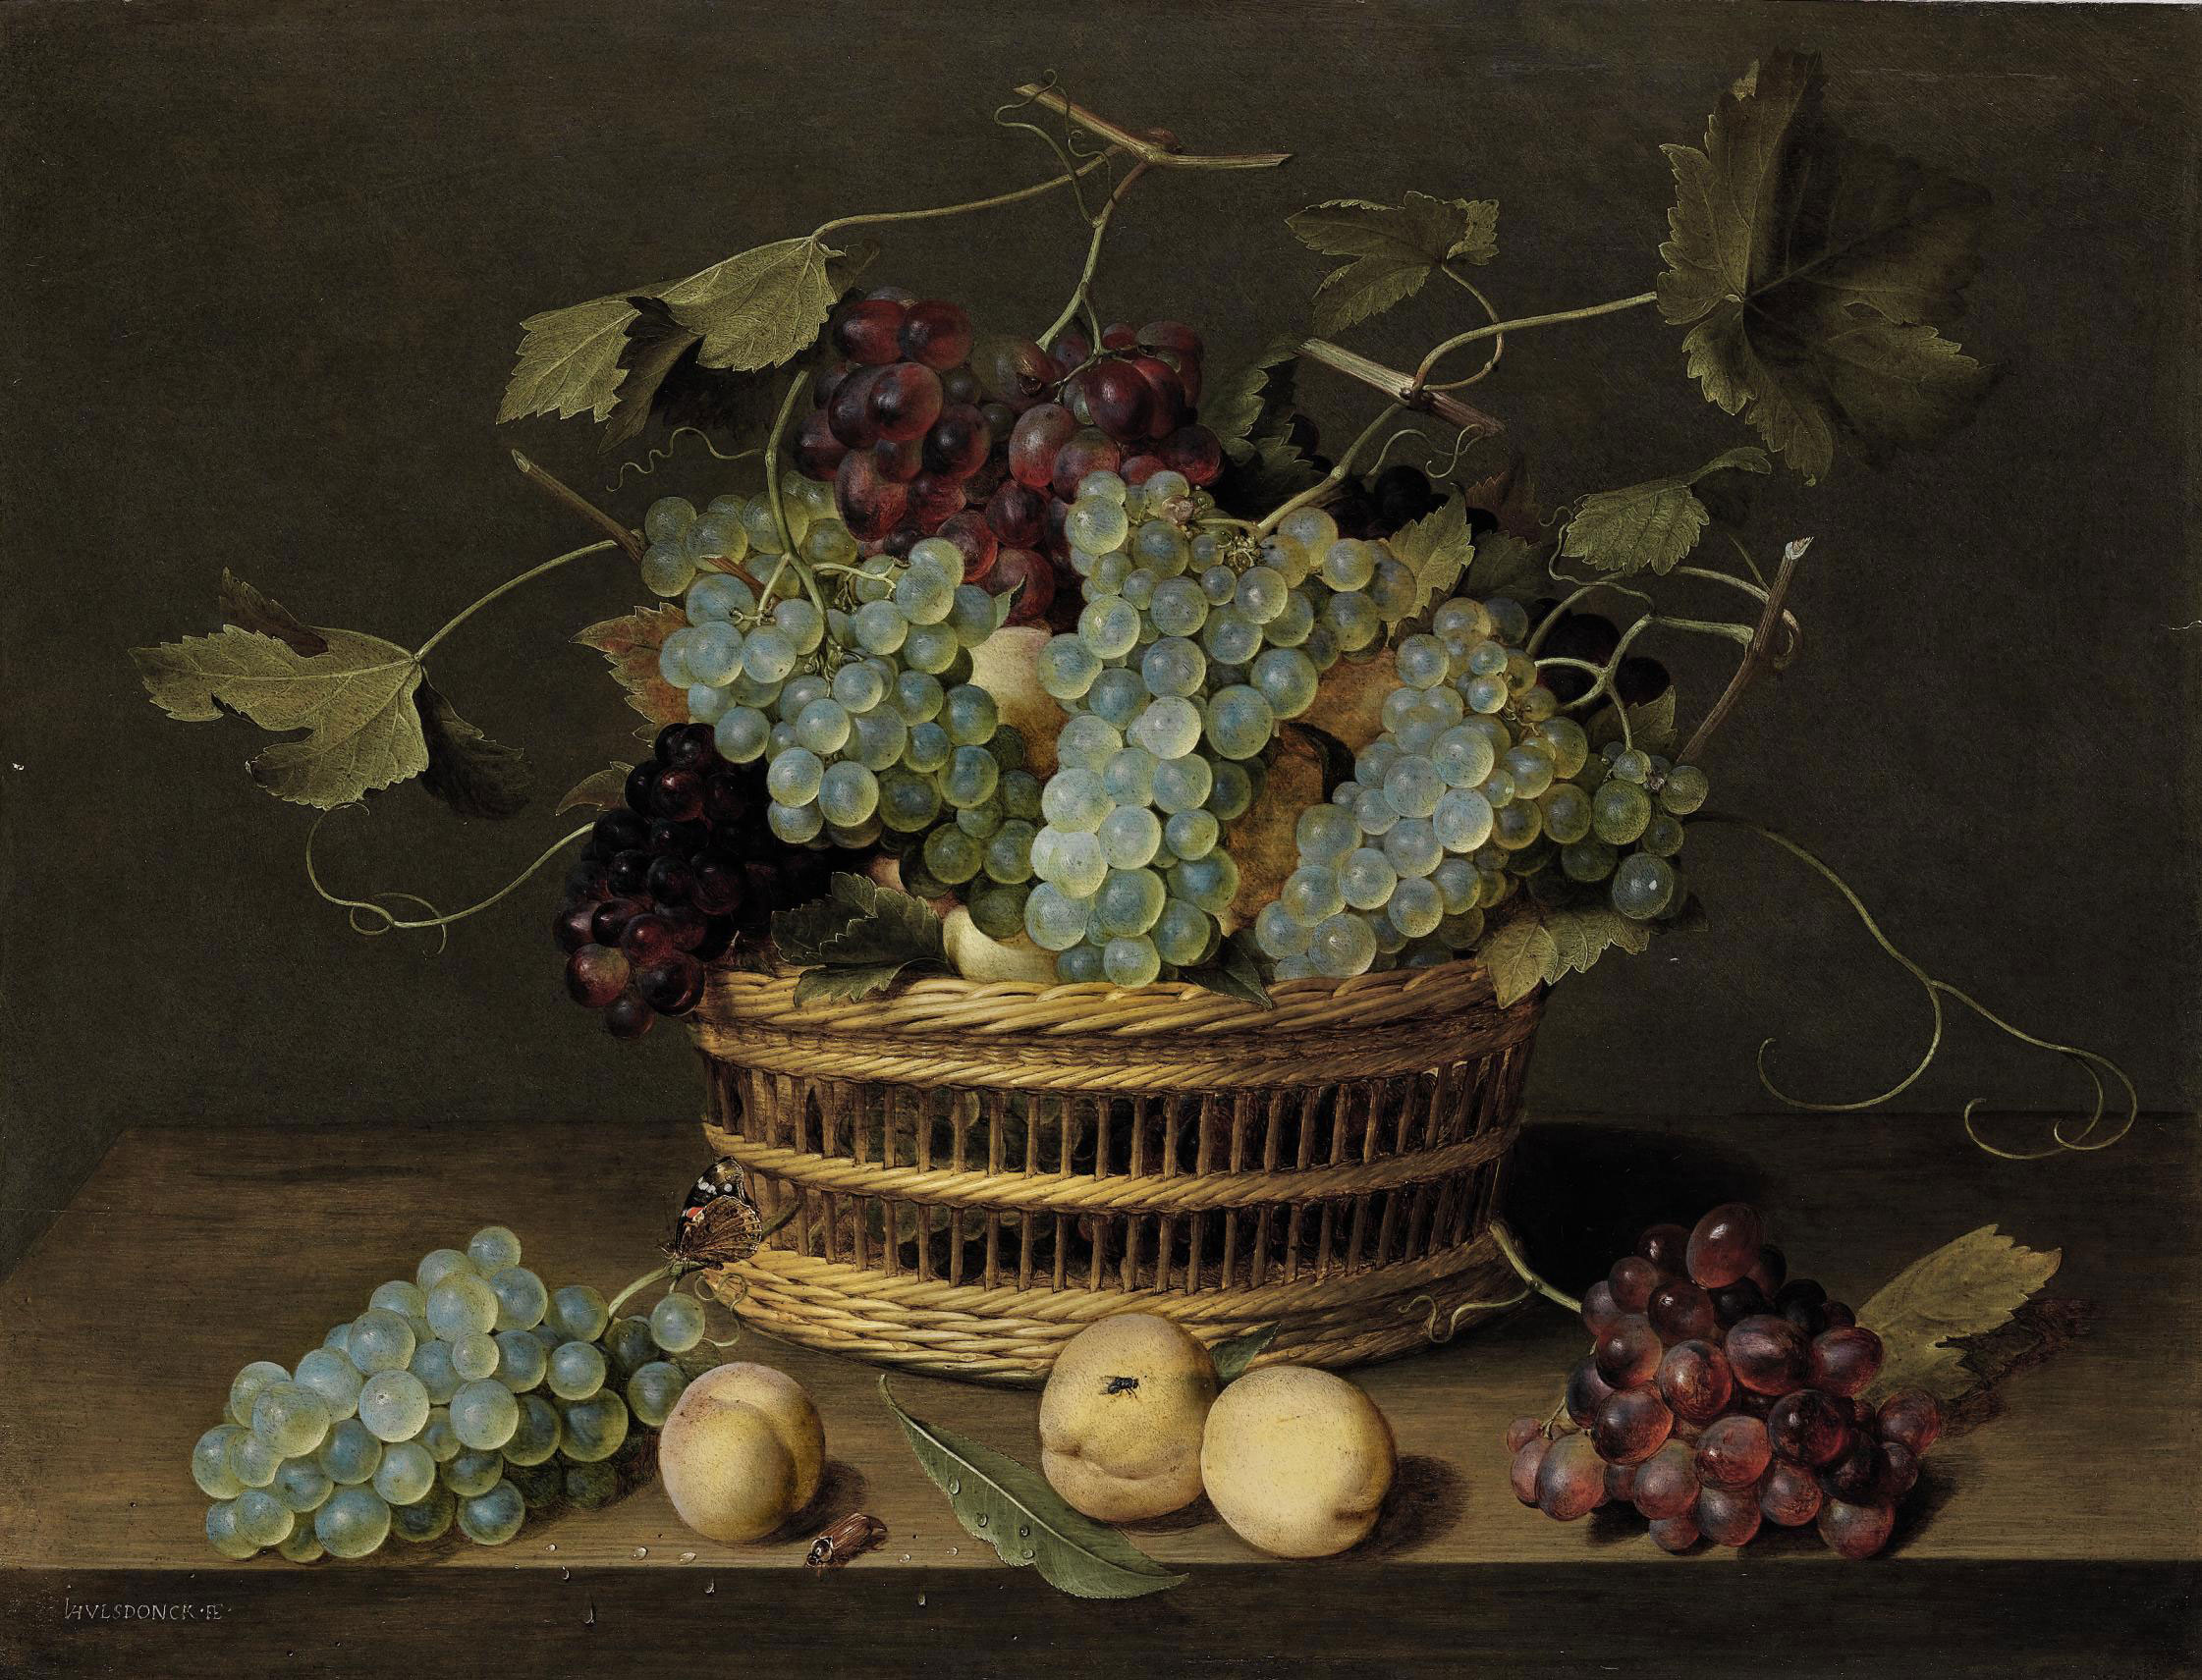 A Still Life Of Grapes In A Basket And A Bunch In A Wan-li 'Kraak'  Porcelain Bowl With Figs In A Tazza On A Red Draped Ledge With A Woodstock,  Pheasants, A